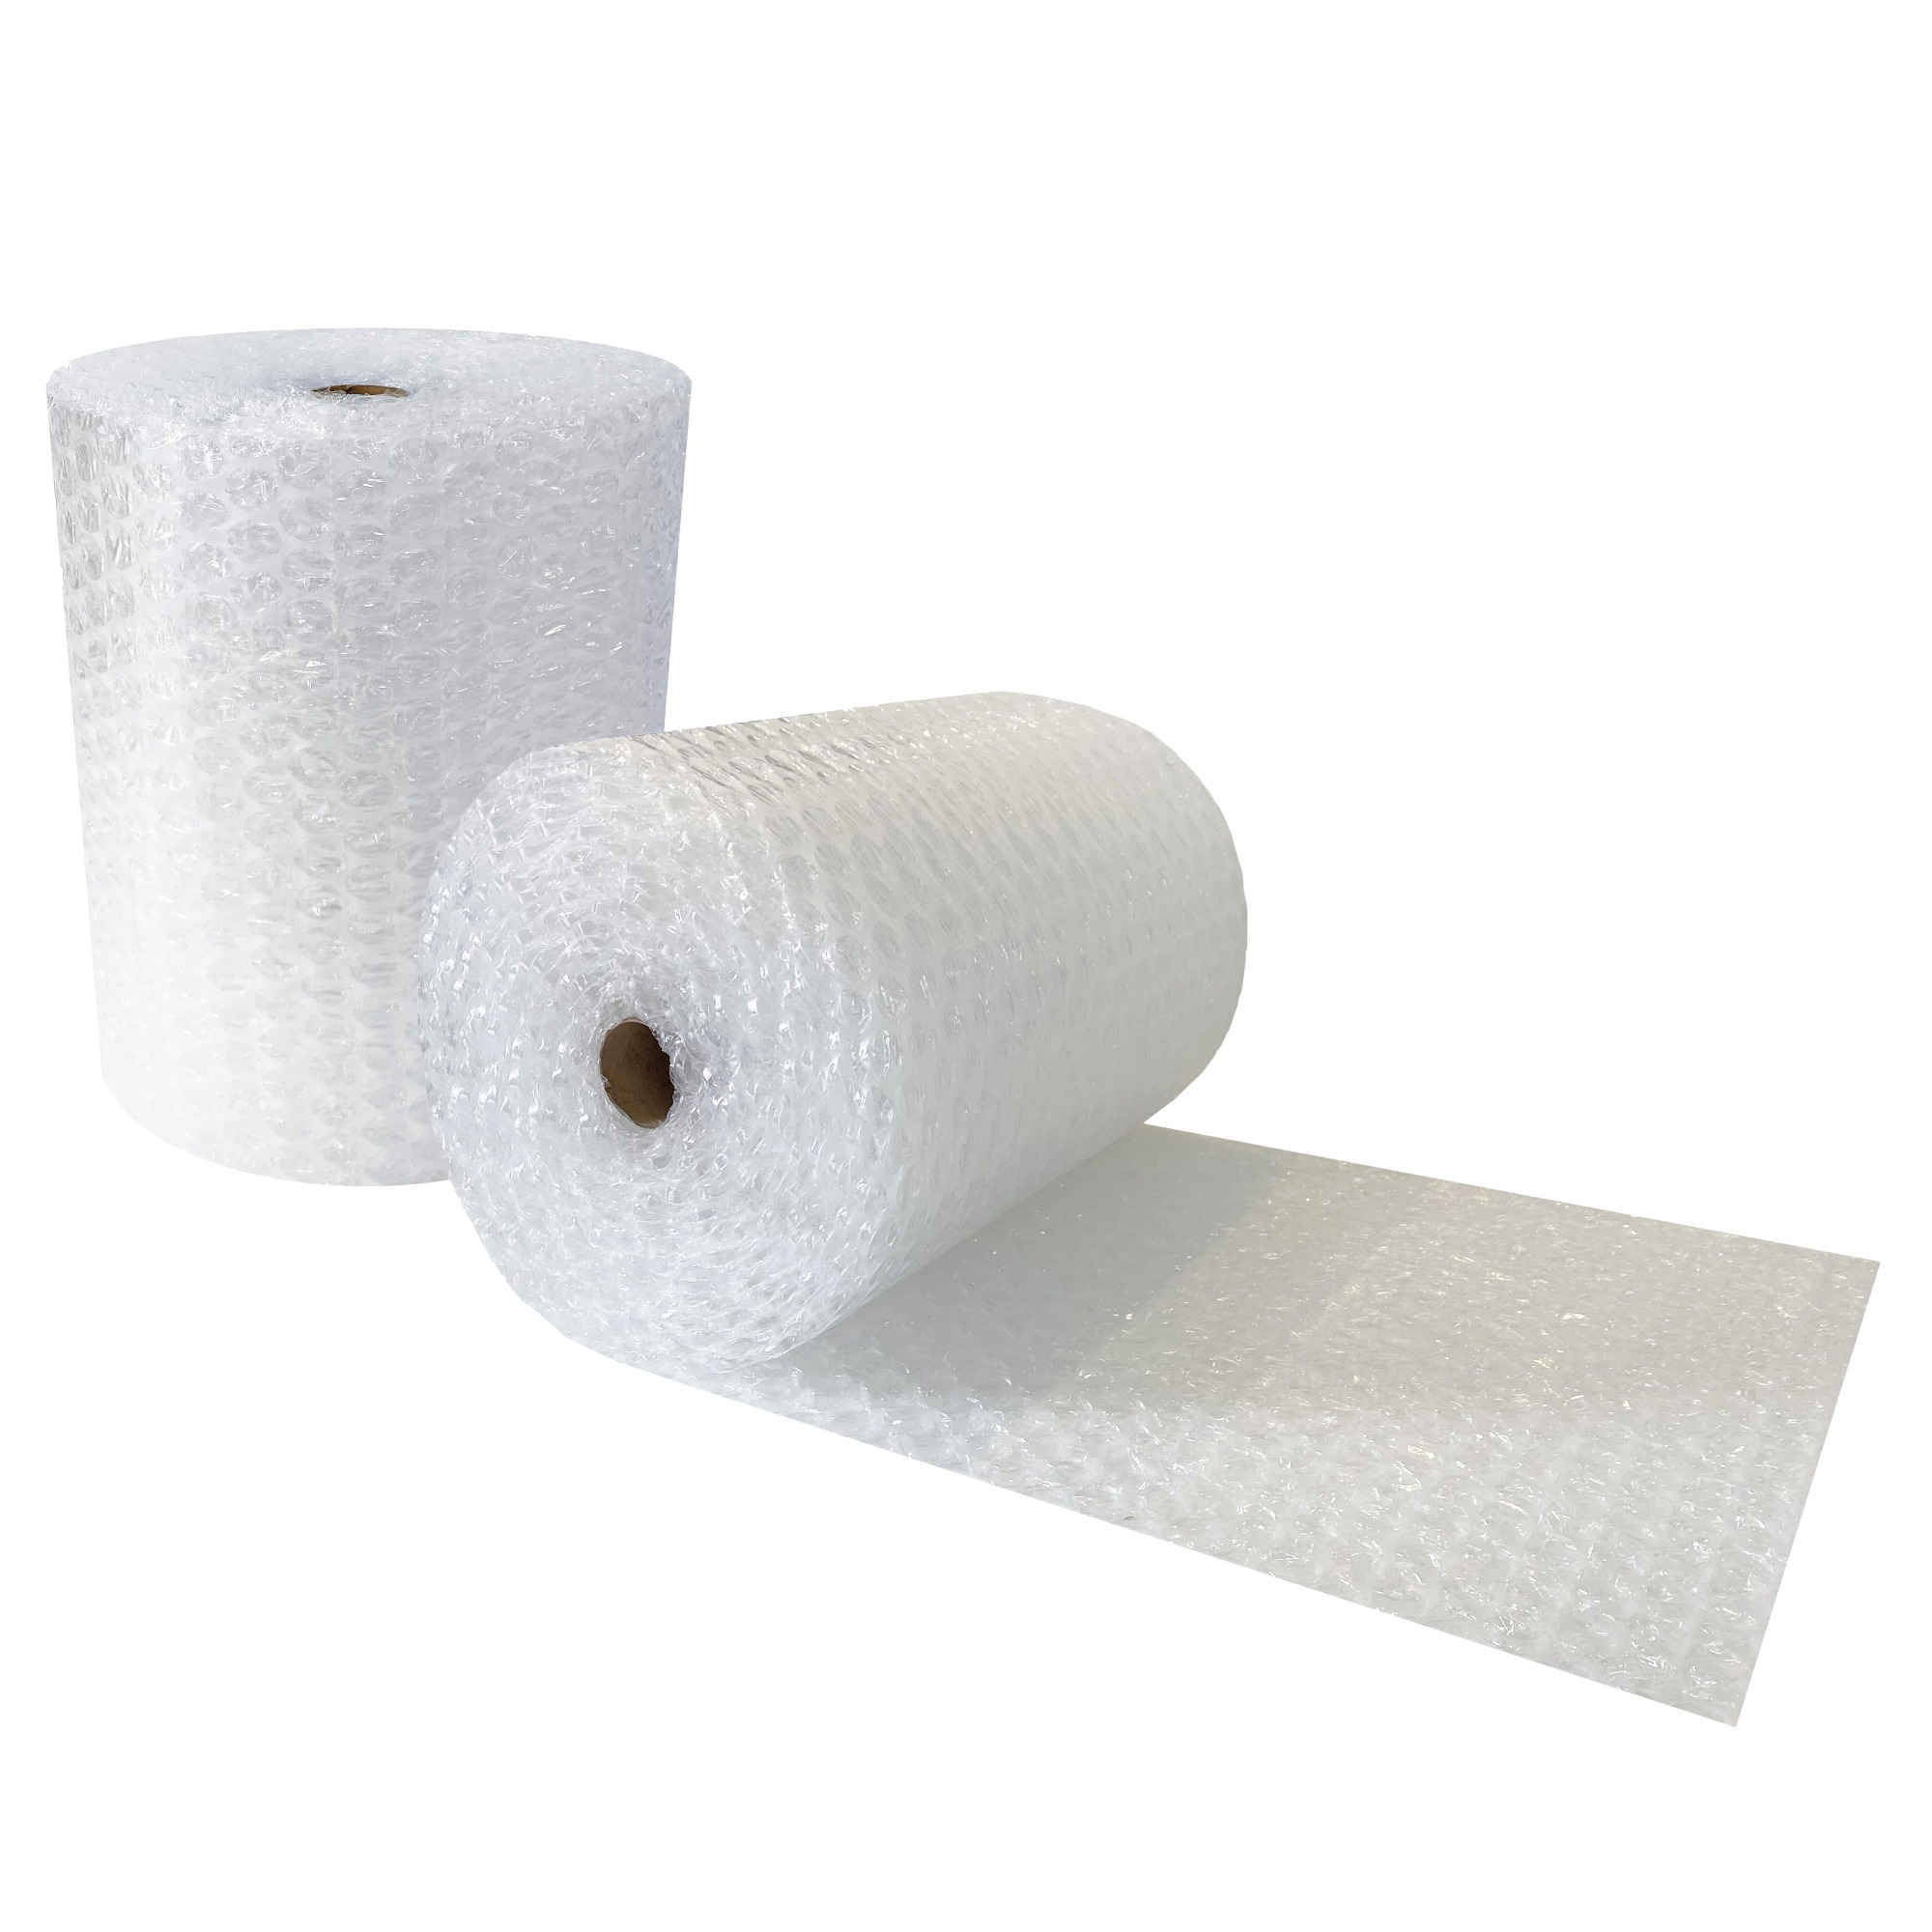 Large Bubble Roll 1/2 x 125 ft x 24 Inch Bubble Large Bubbles Perforated Wrap 